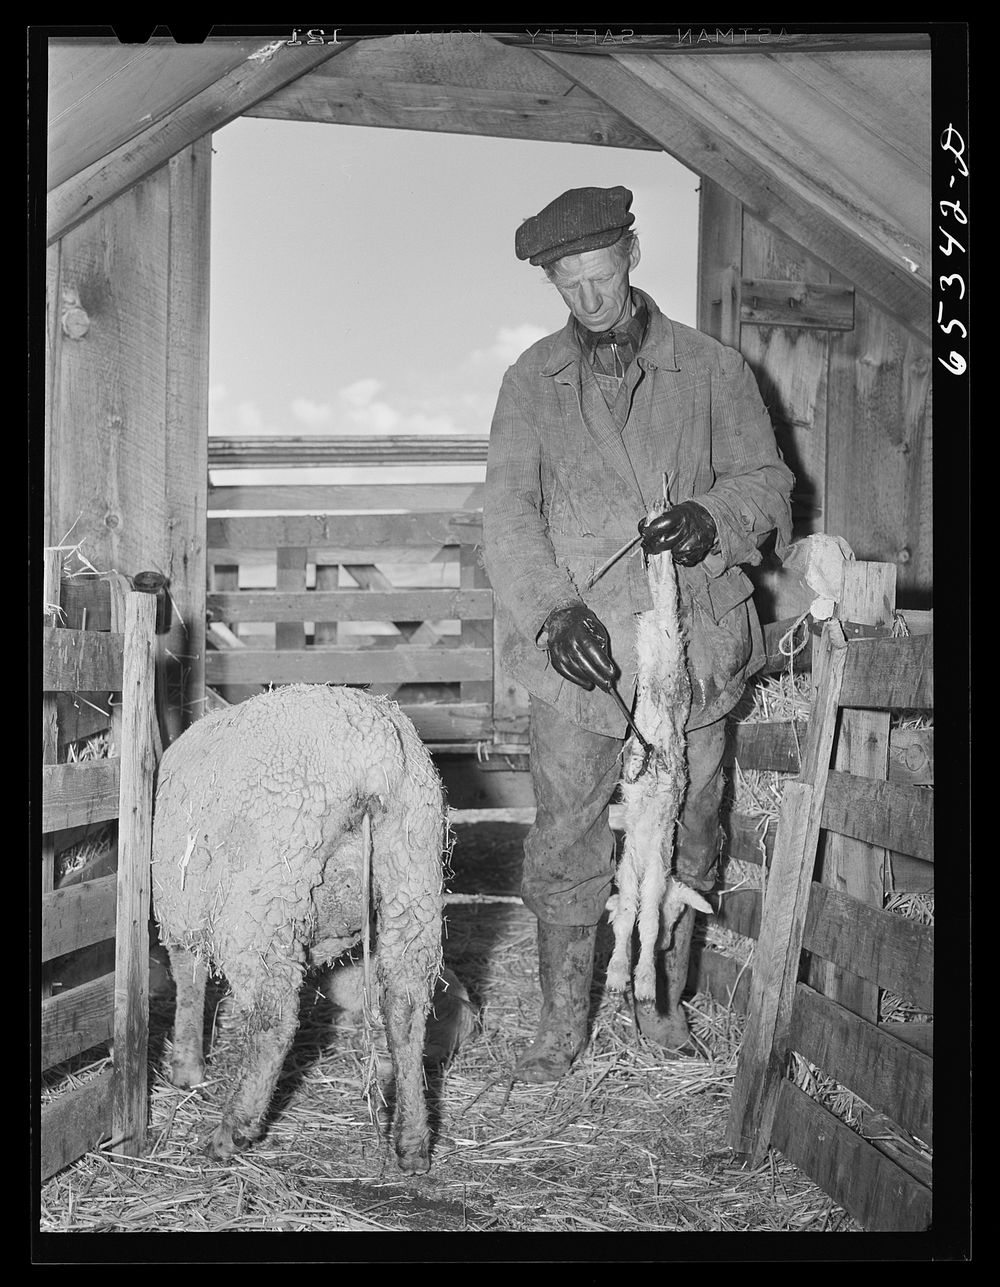 Ravalli County, Montana. Putting iodine on naval of newborn lamb. Sourced from the Library of Congress.